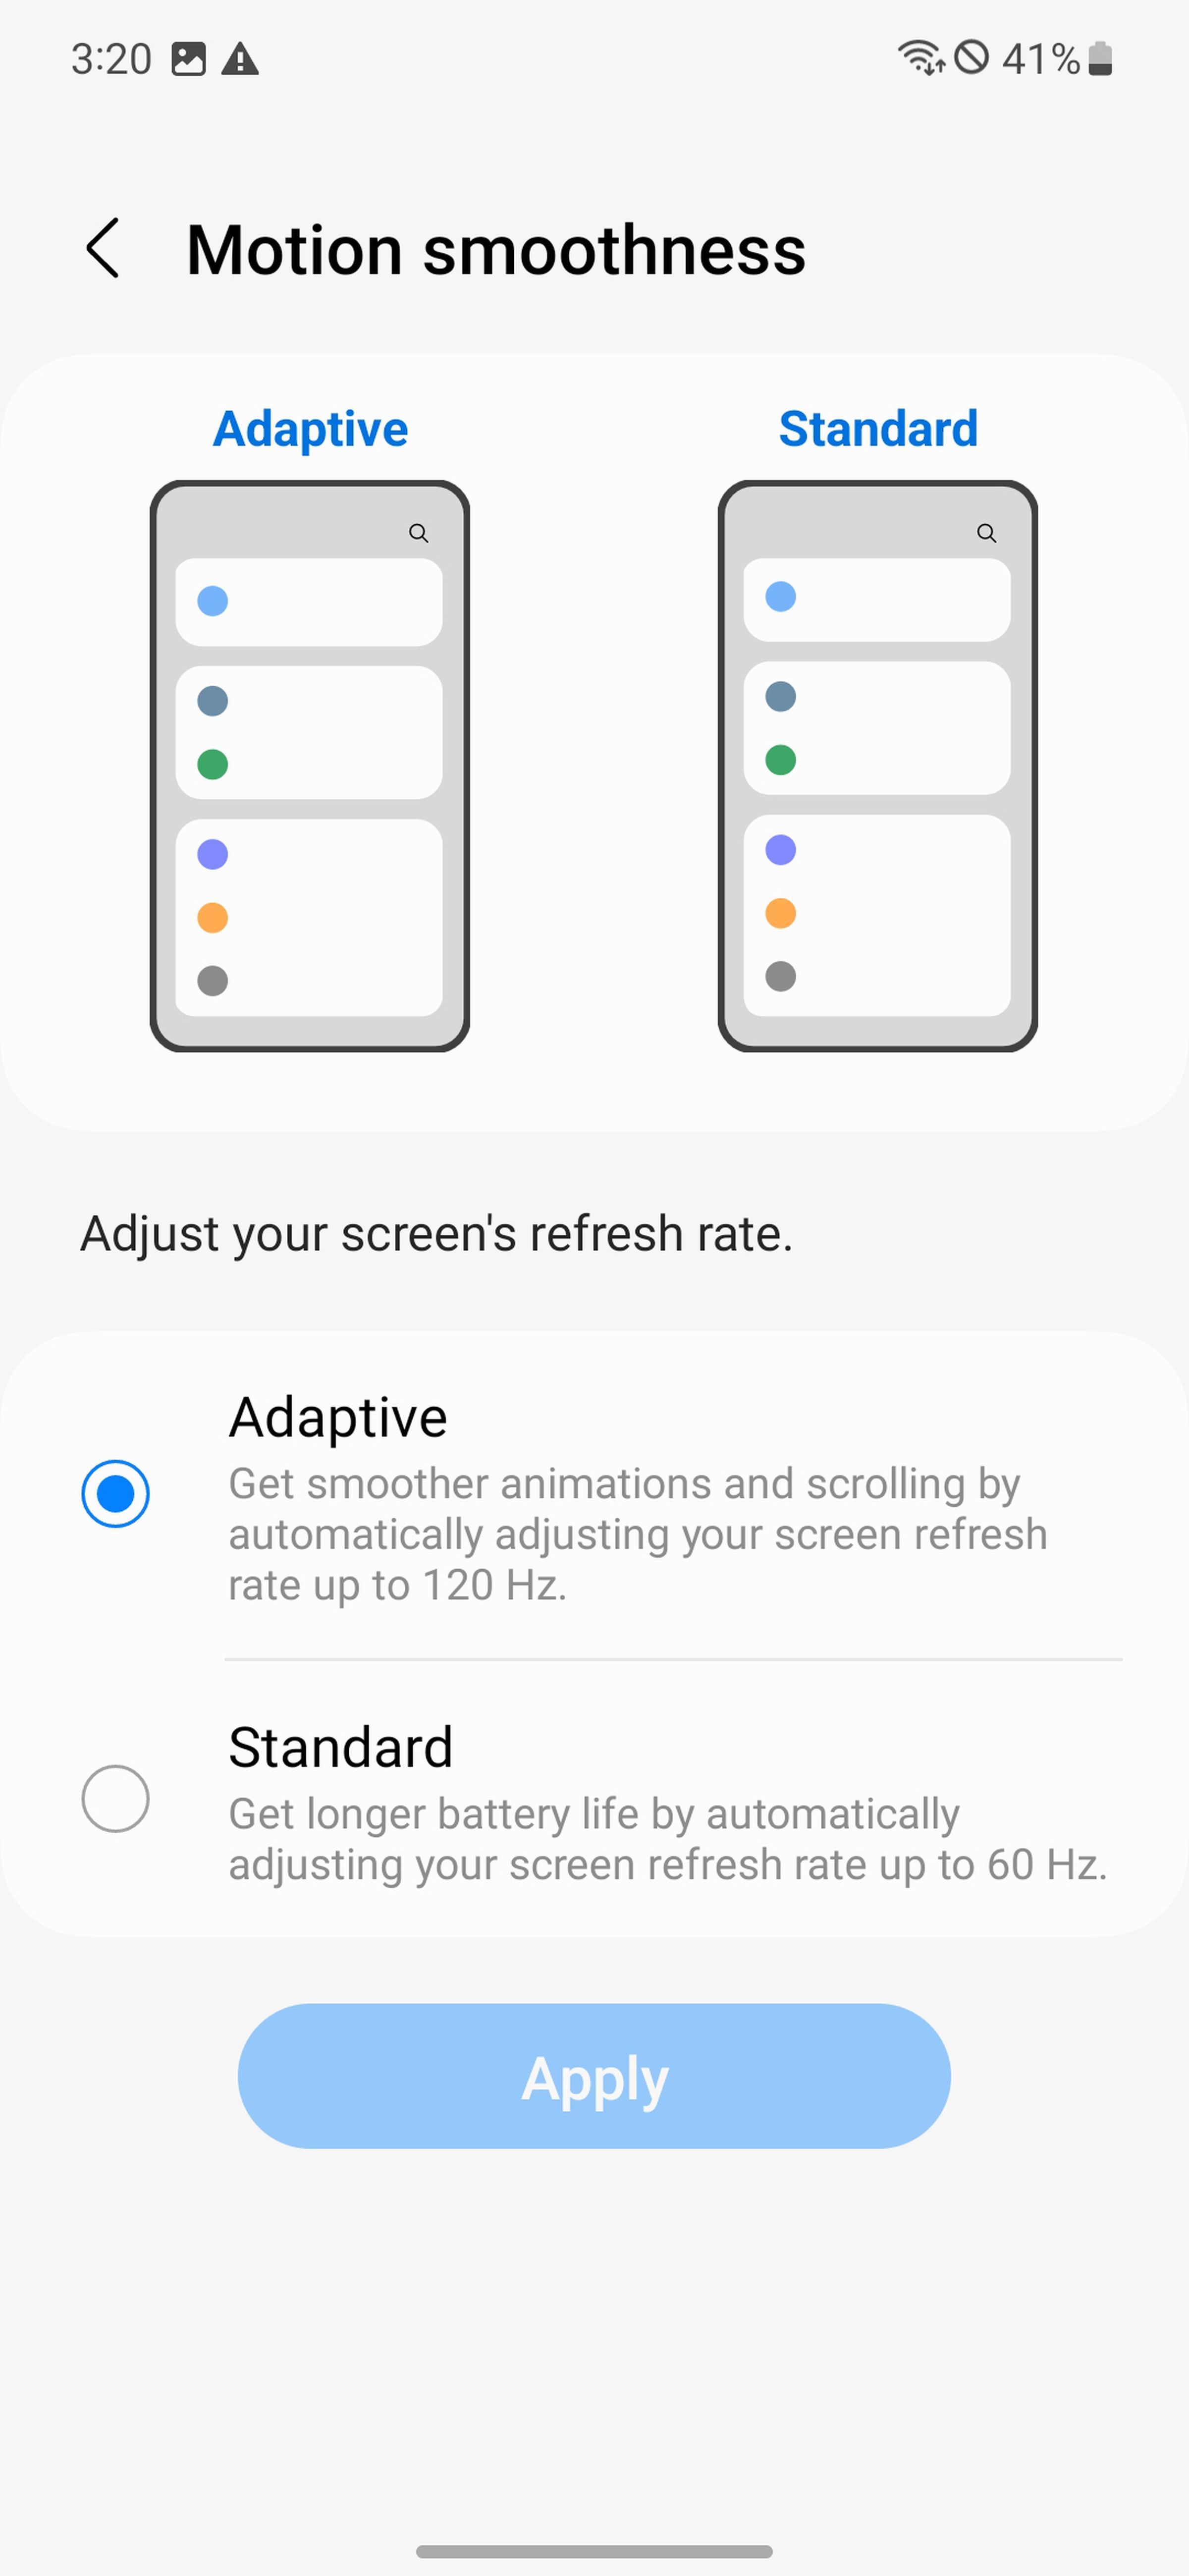 Screen headed Motion smoothness with two images of phones, one labeled Adaptive and one labeled Standard, and options for both below that.